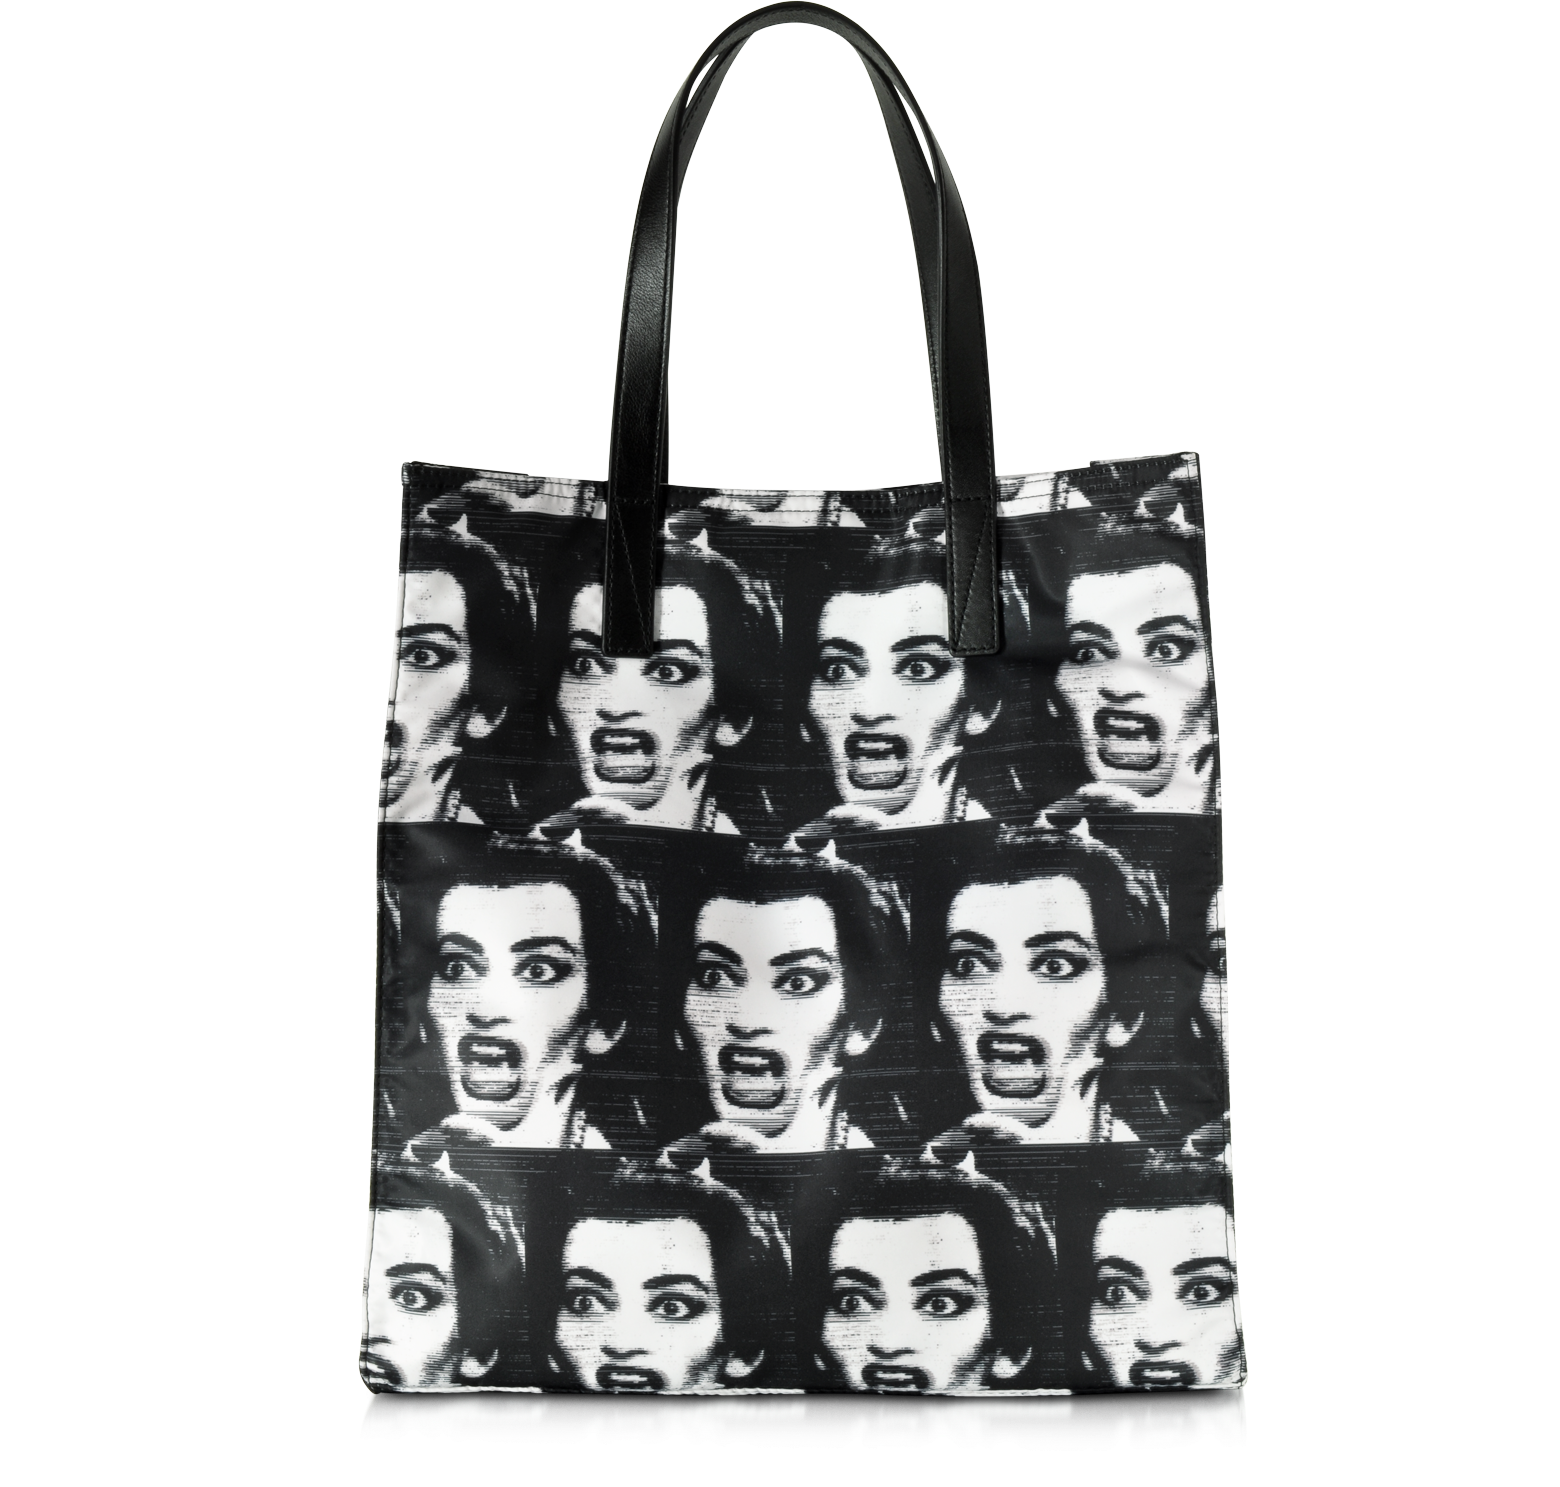 Marc Jacobs Maria Callas Printed B.Y.O.T. N/S Tote at FORZIERI